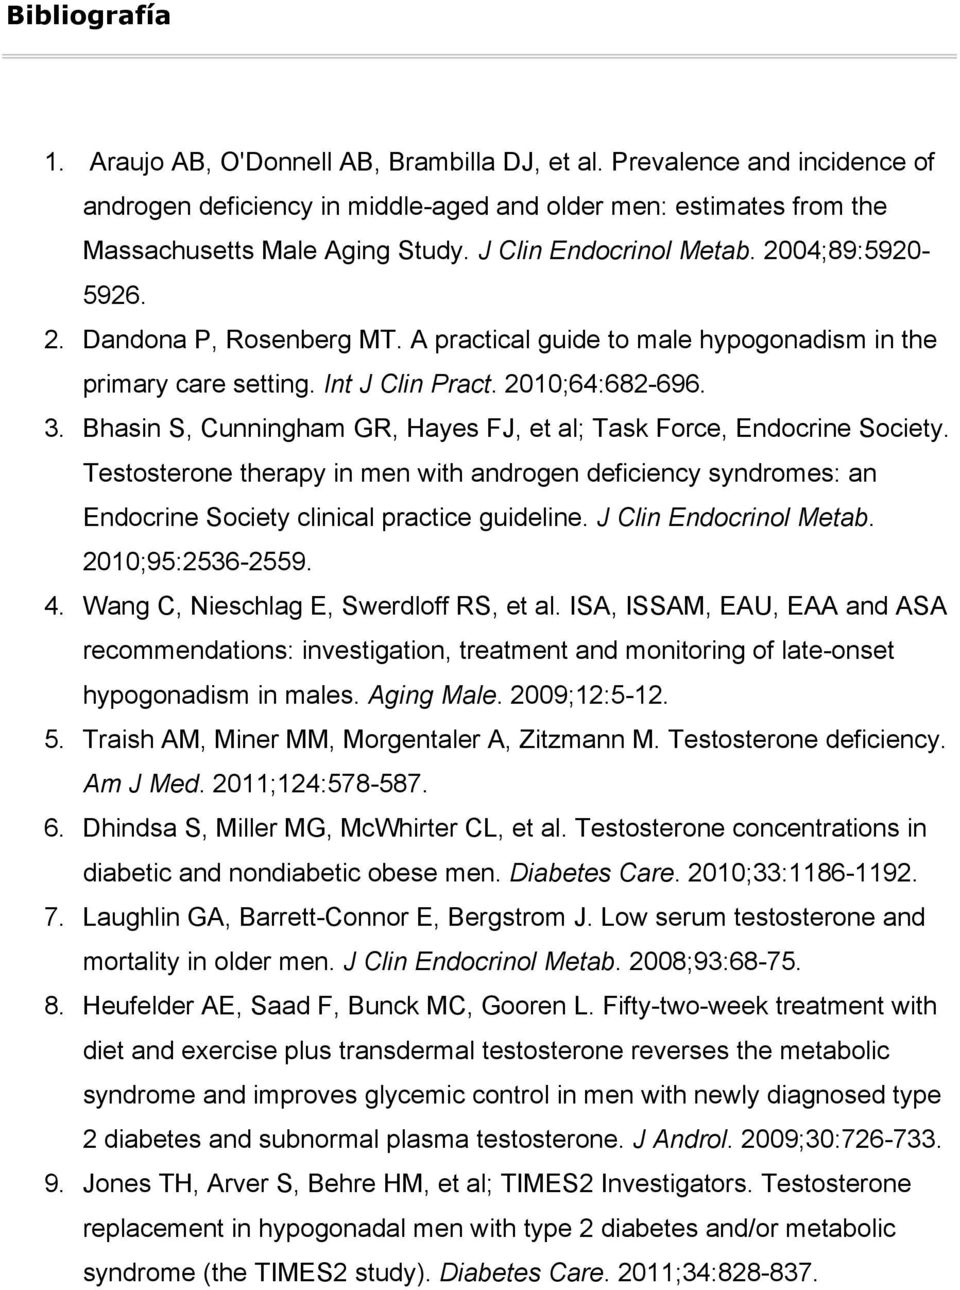 Bhasin S, Cunningham GR, Hayes FJ, et al; Task Force, Endocrine Society. Testosterone therapy in men with androgen deficiency syndromes: an Endocrine Society clinical practice guideline.